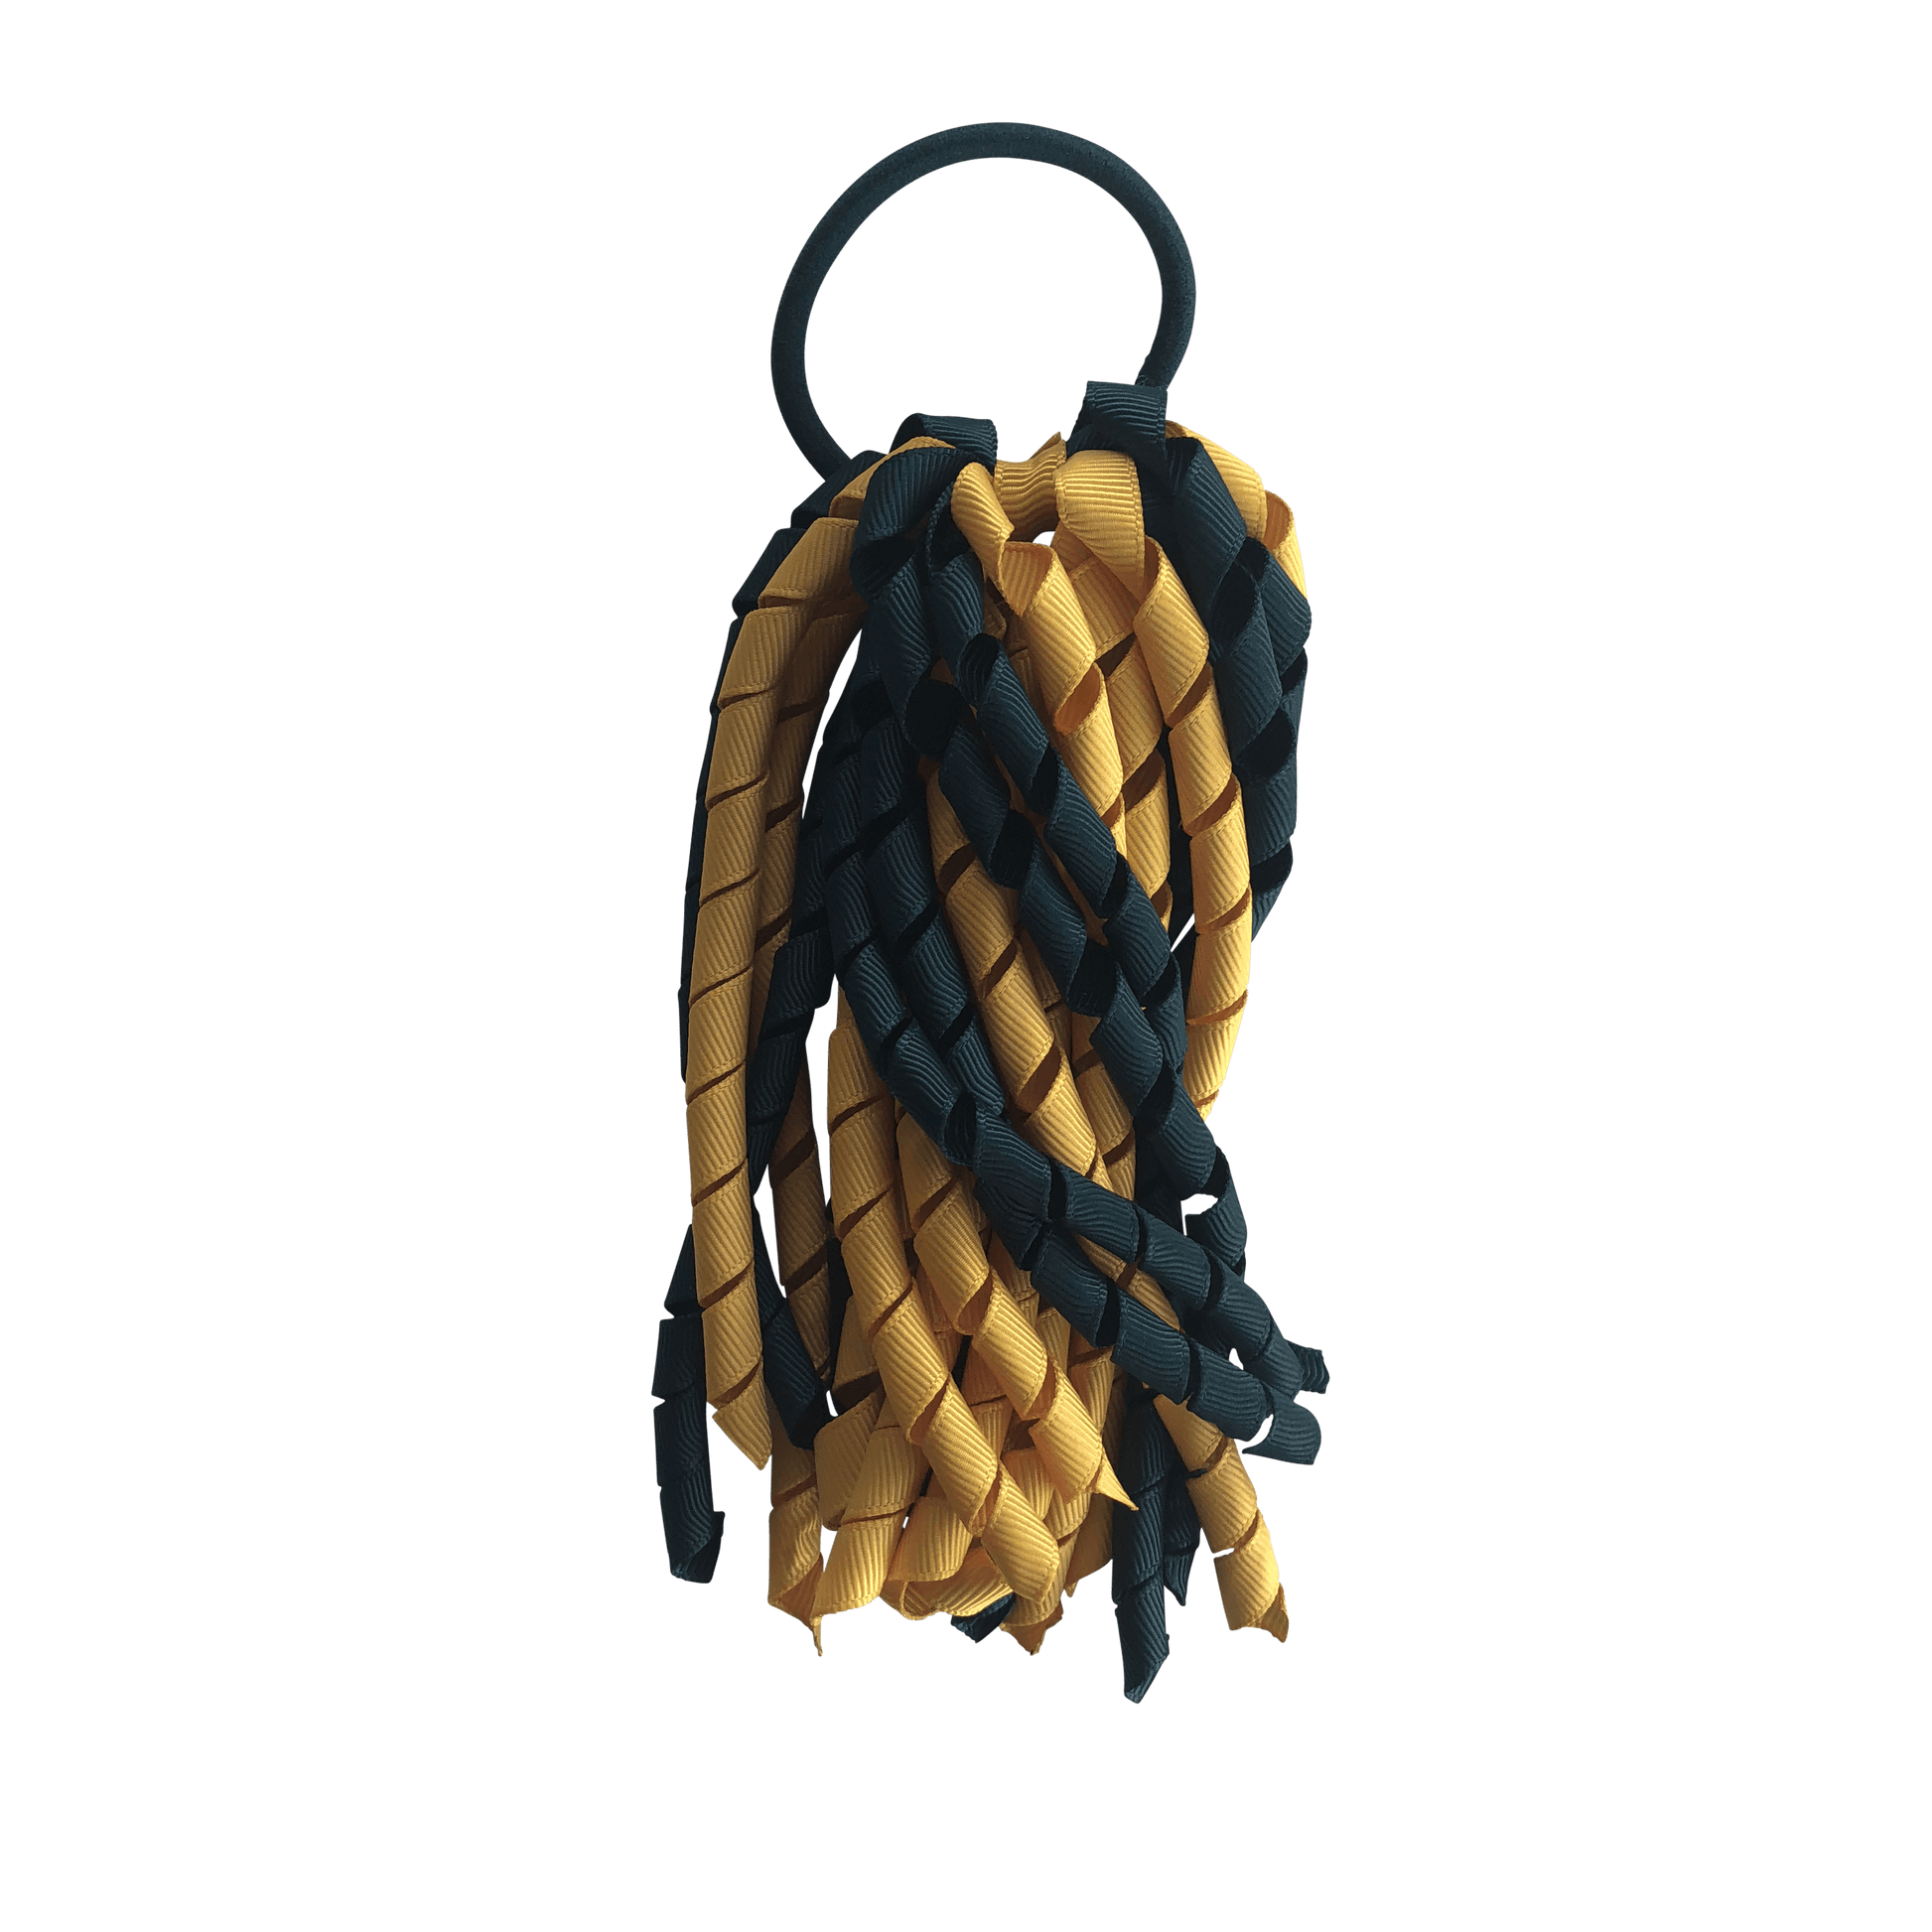 Darkest Petrol Green & Gold Hair Accessories - Ponytails and Fairytales